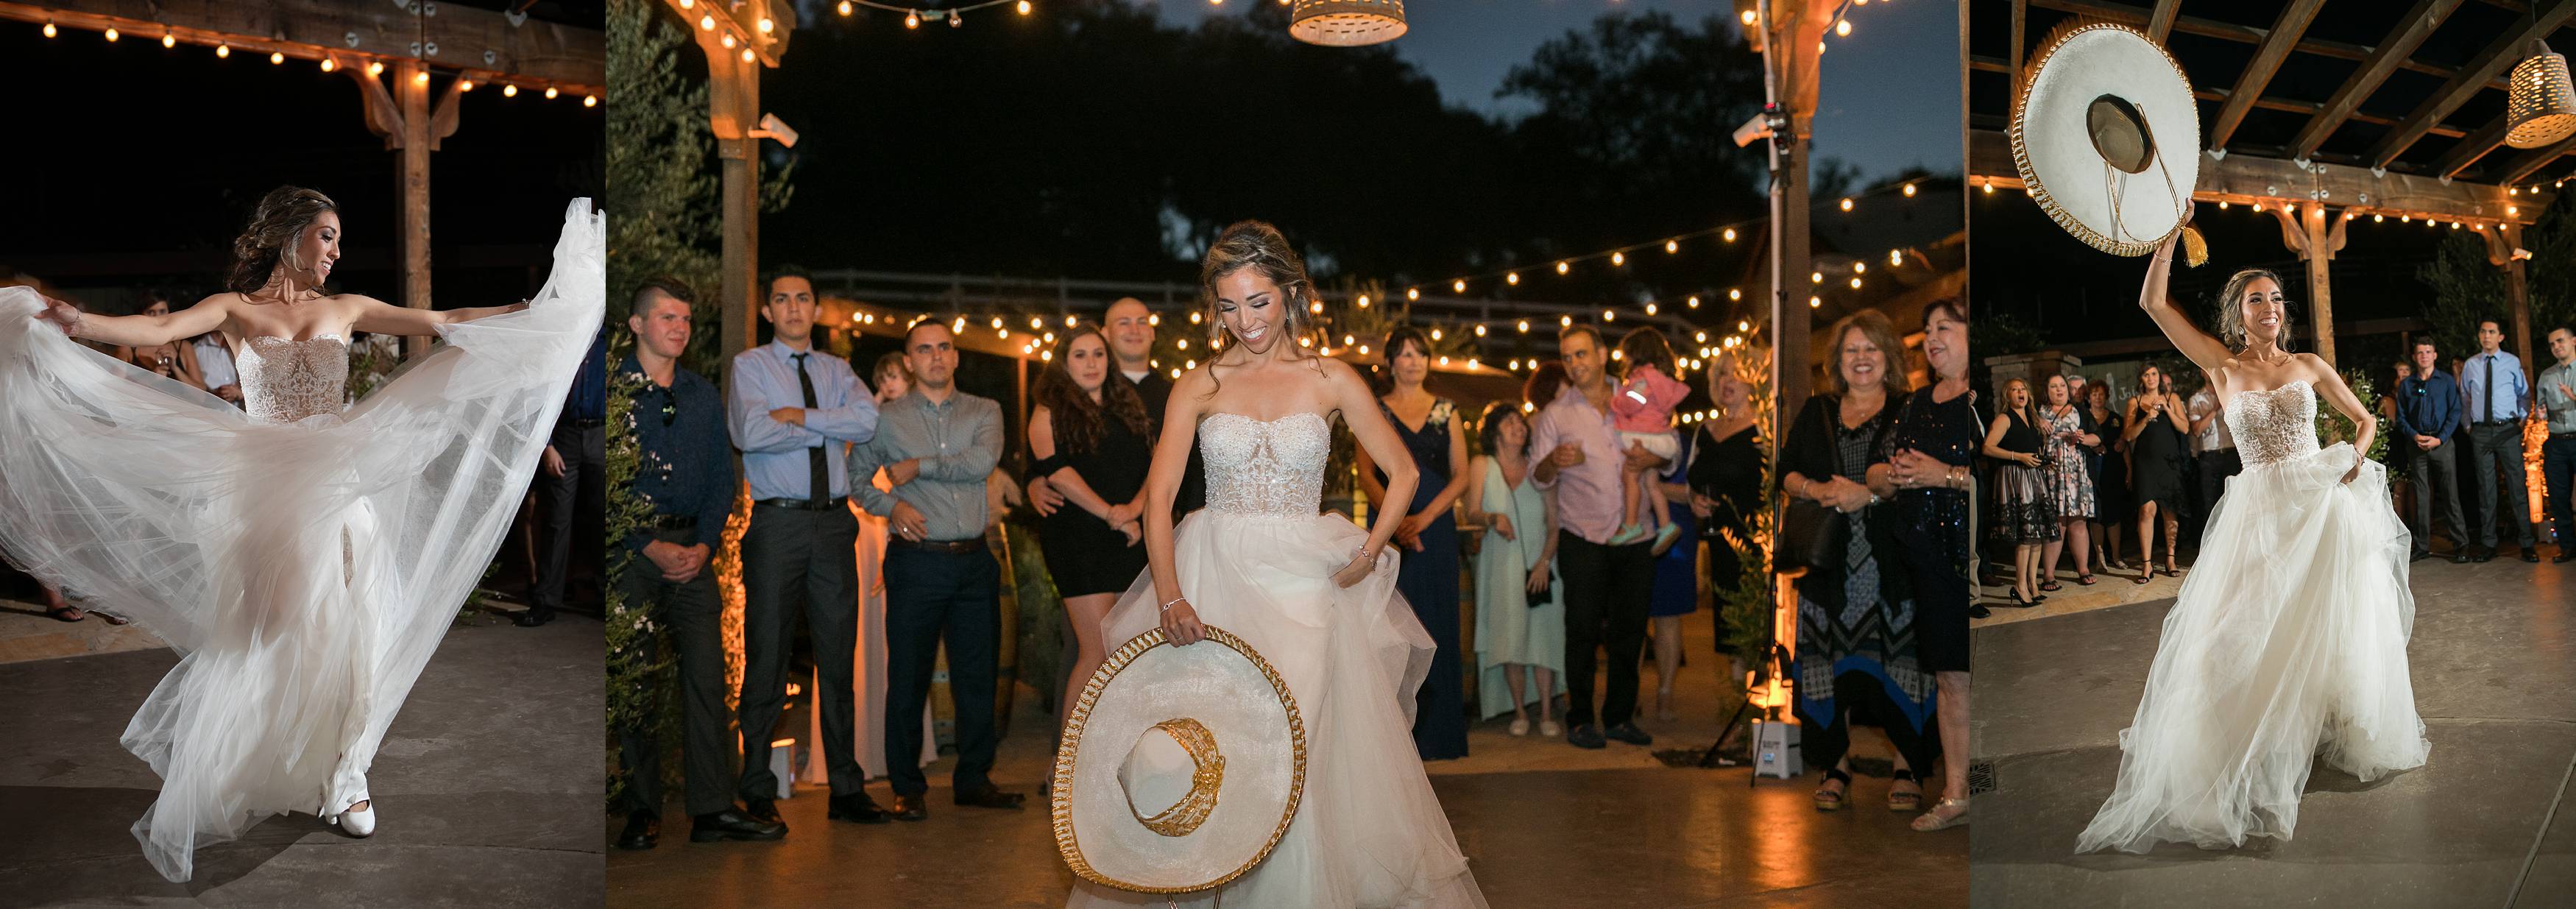 Mexican wedding reception in southern california 